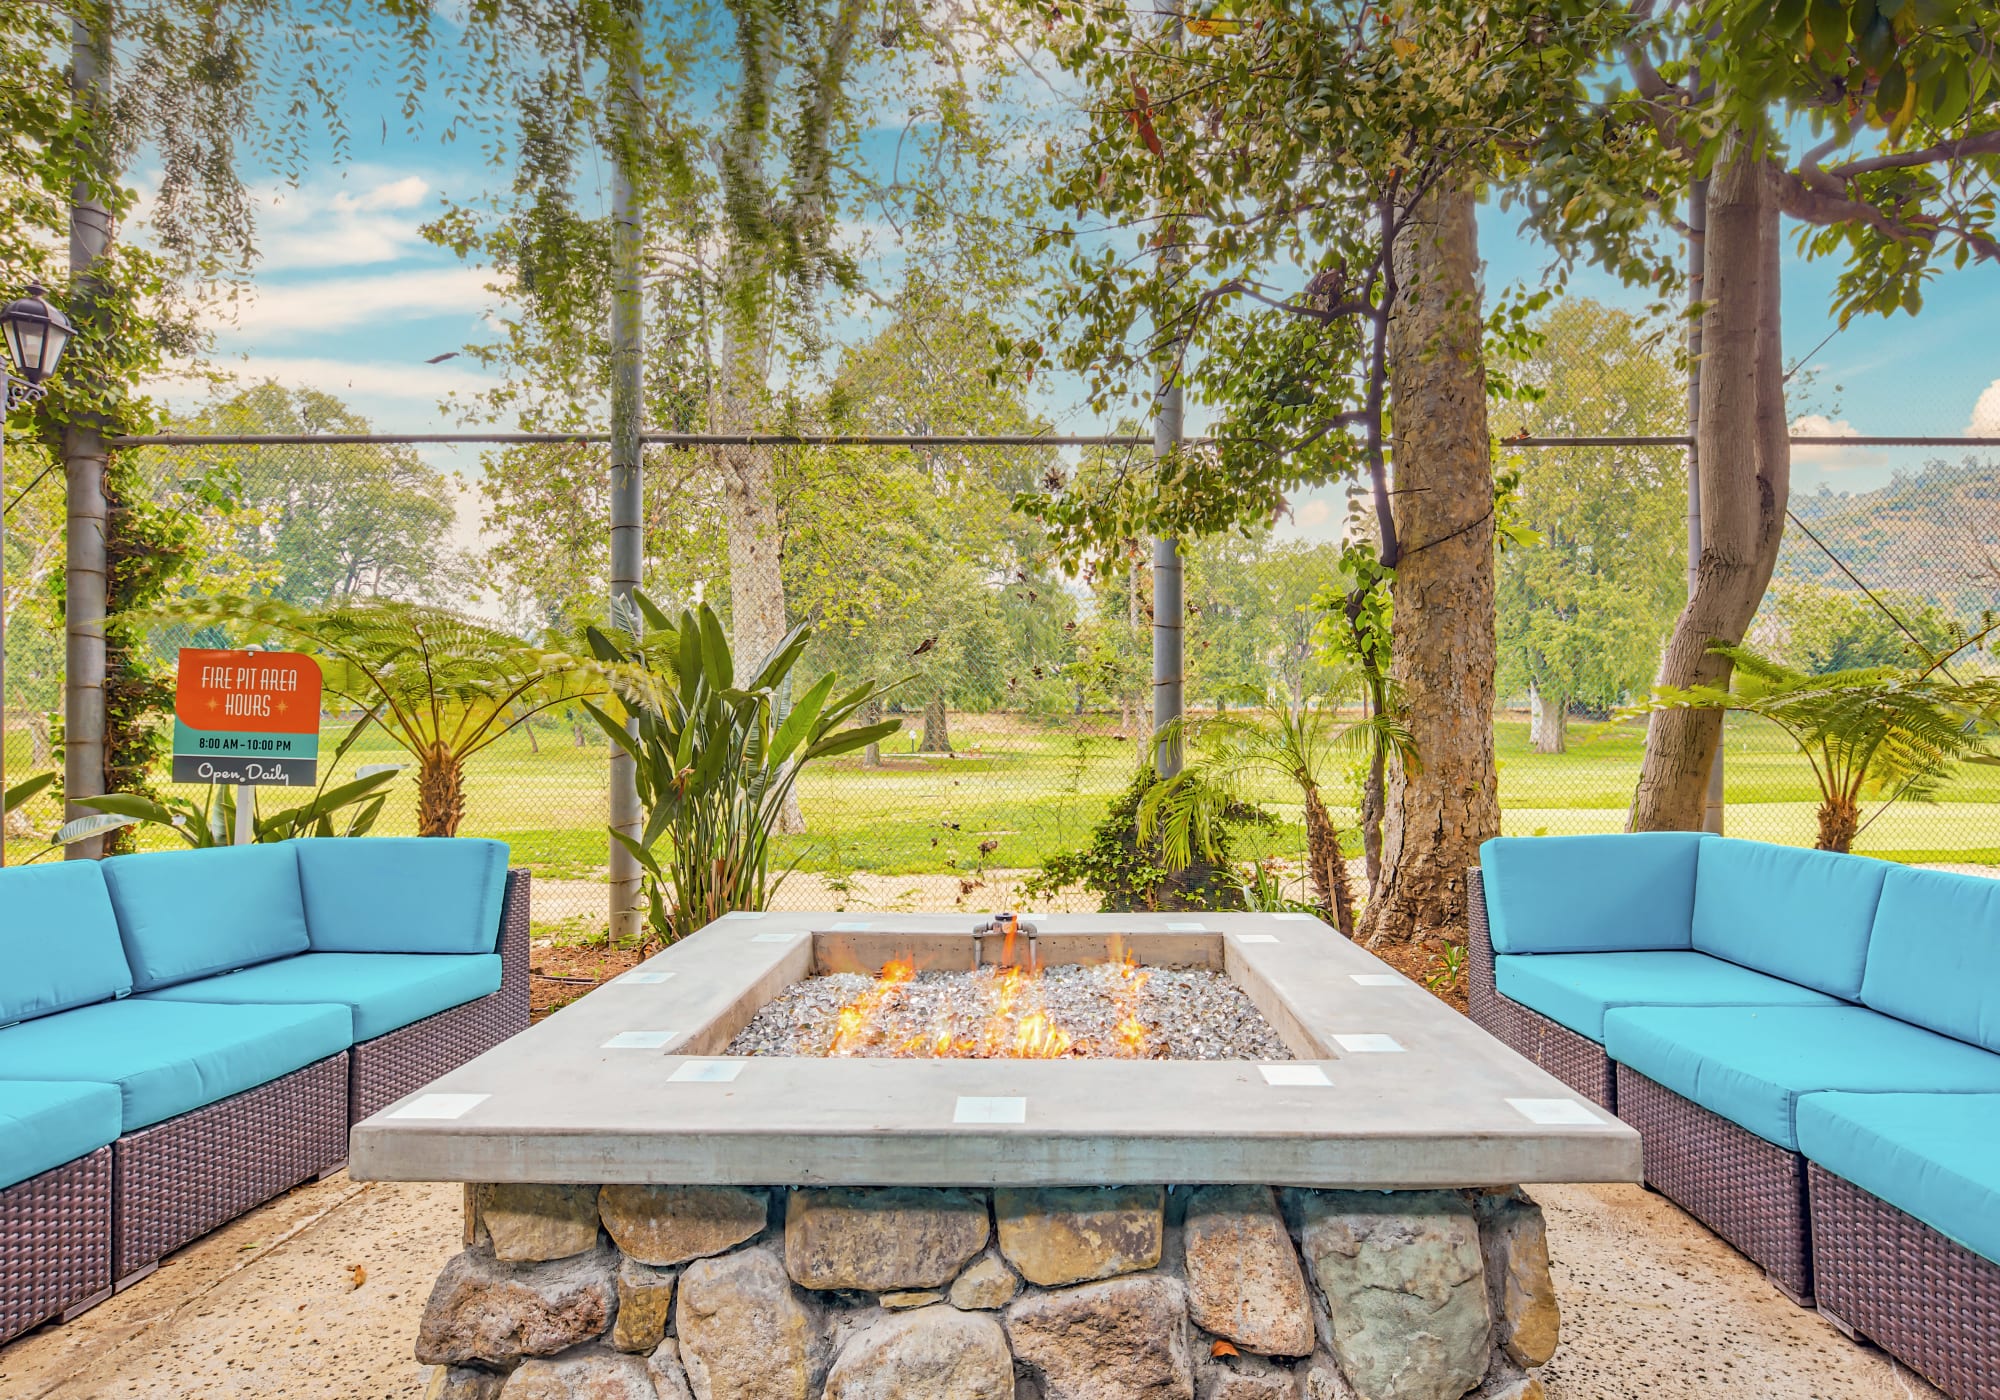 Outdoor lounge and fire pit at Rancho Los Feliz in Los Angeles, California